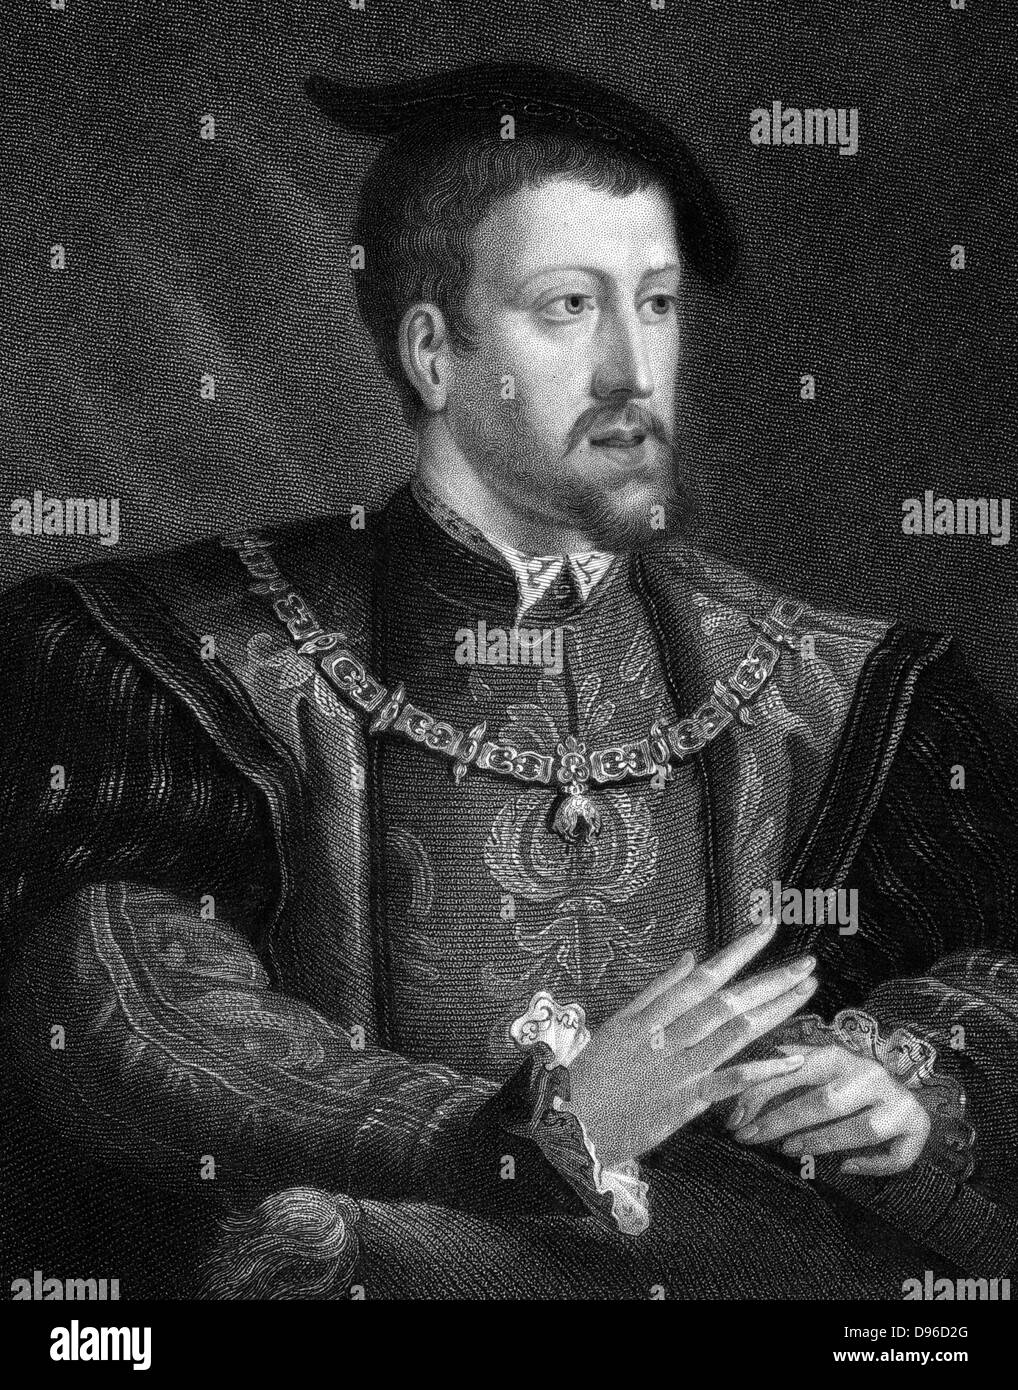 Charles V (1500-1553) Holy Roman Emperor from 1519. Shown here wearing chain of Order of the Golden Fleece.  Founder of Habsburg dynasty. Engraving 1835. Stock Photo